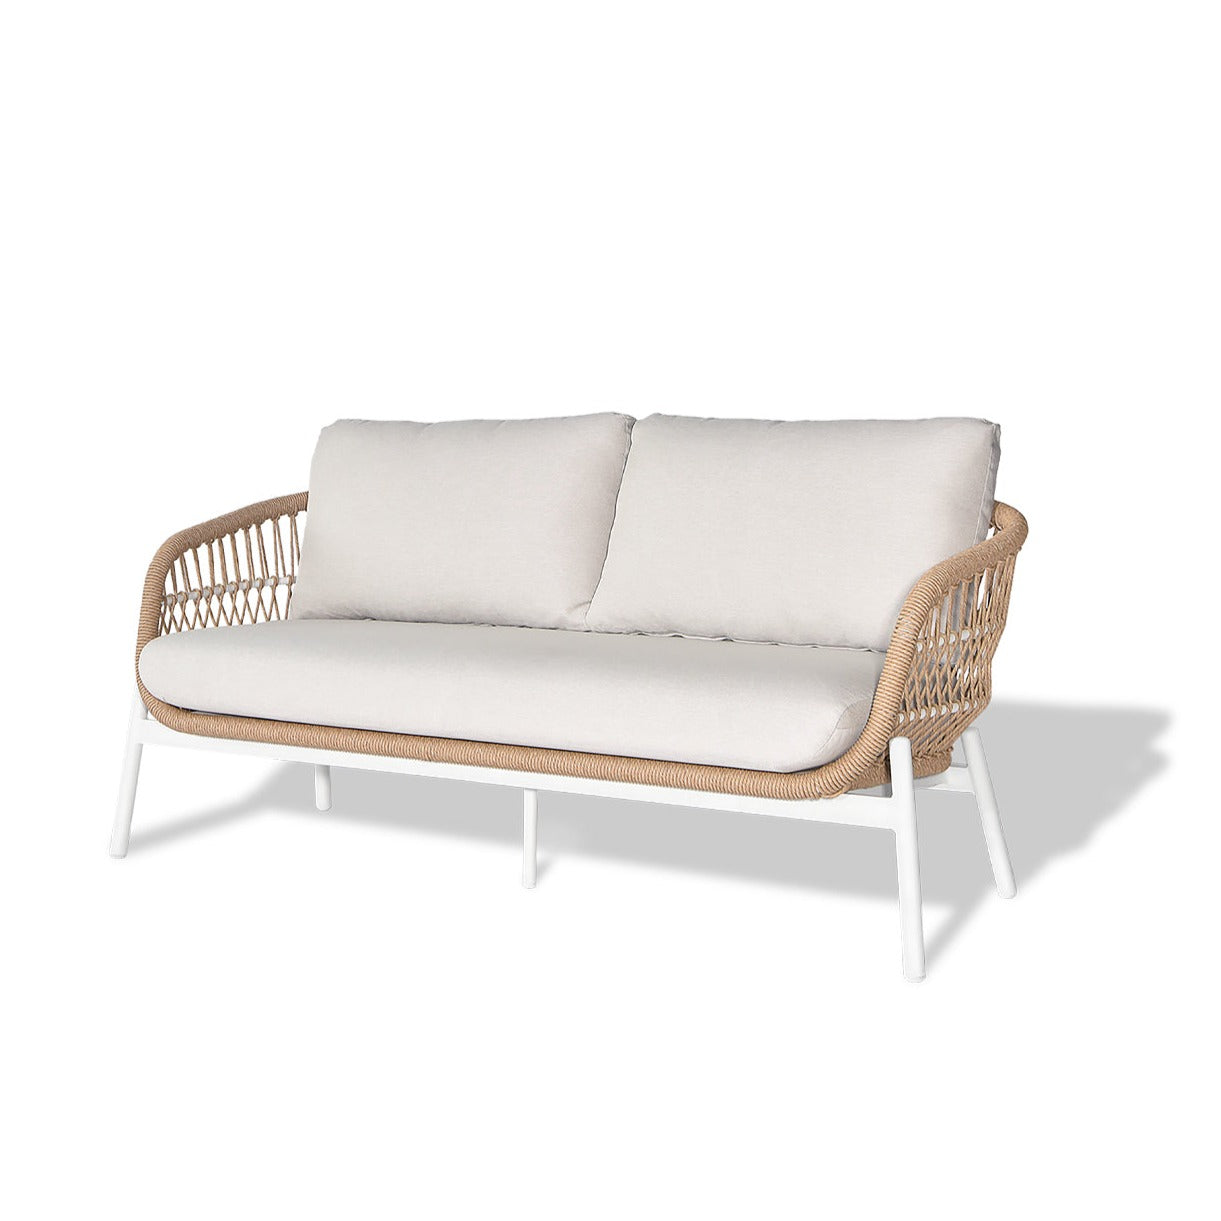 Ross 2-Seater Outdoor Sofa